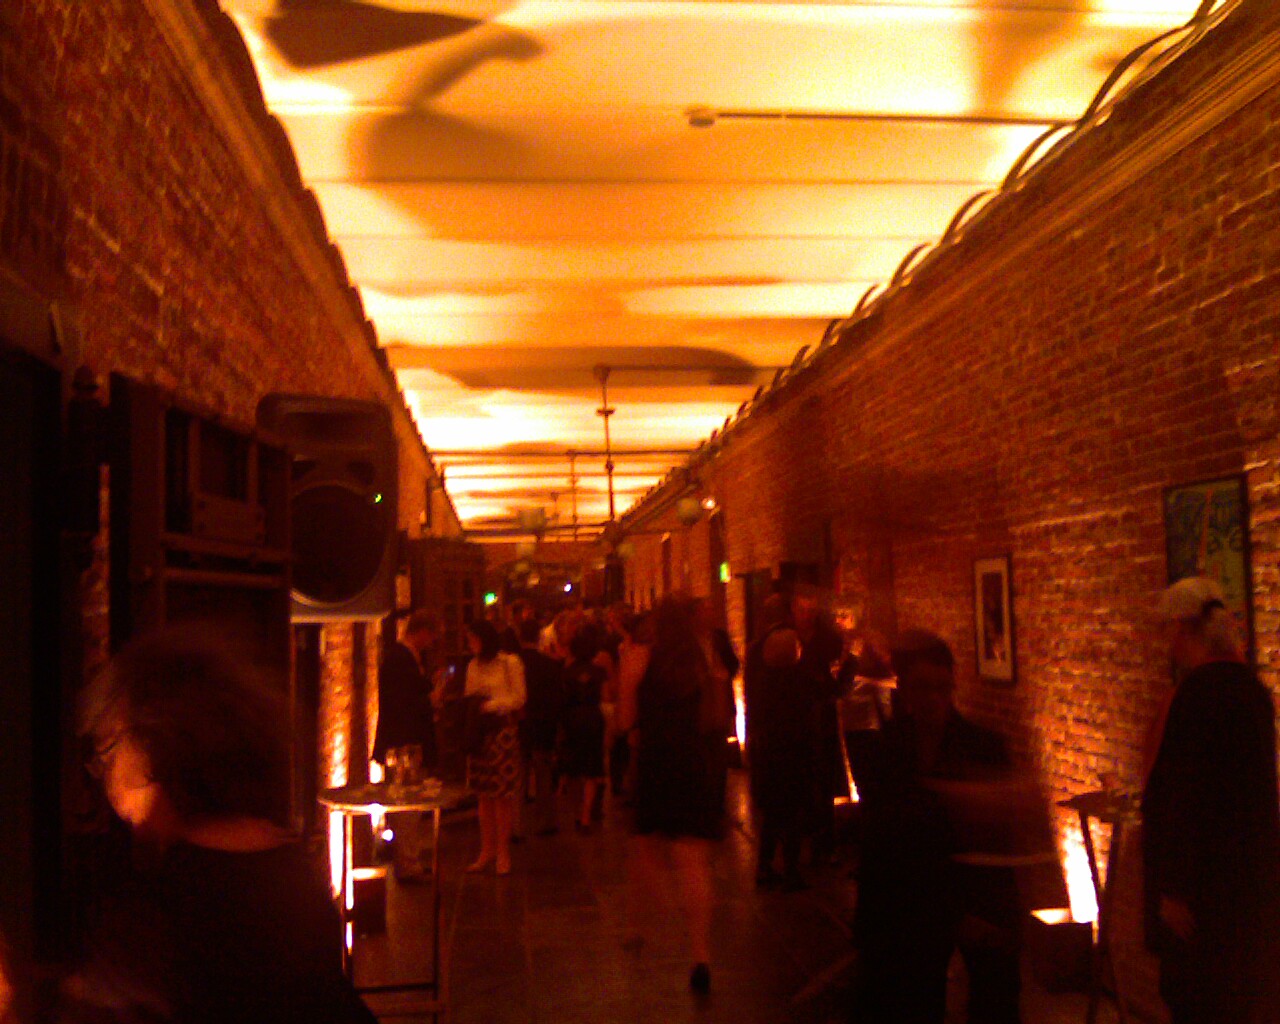 The vaults downstairs at the Mint were lit up and the spaces were packed